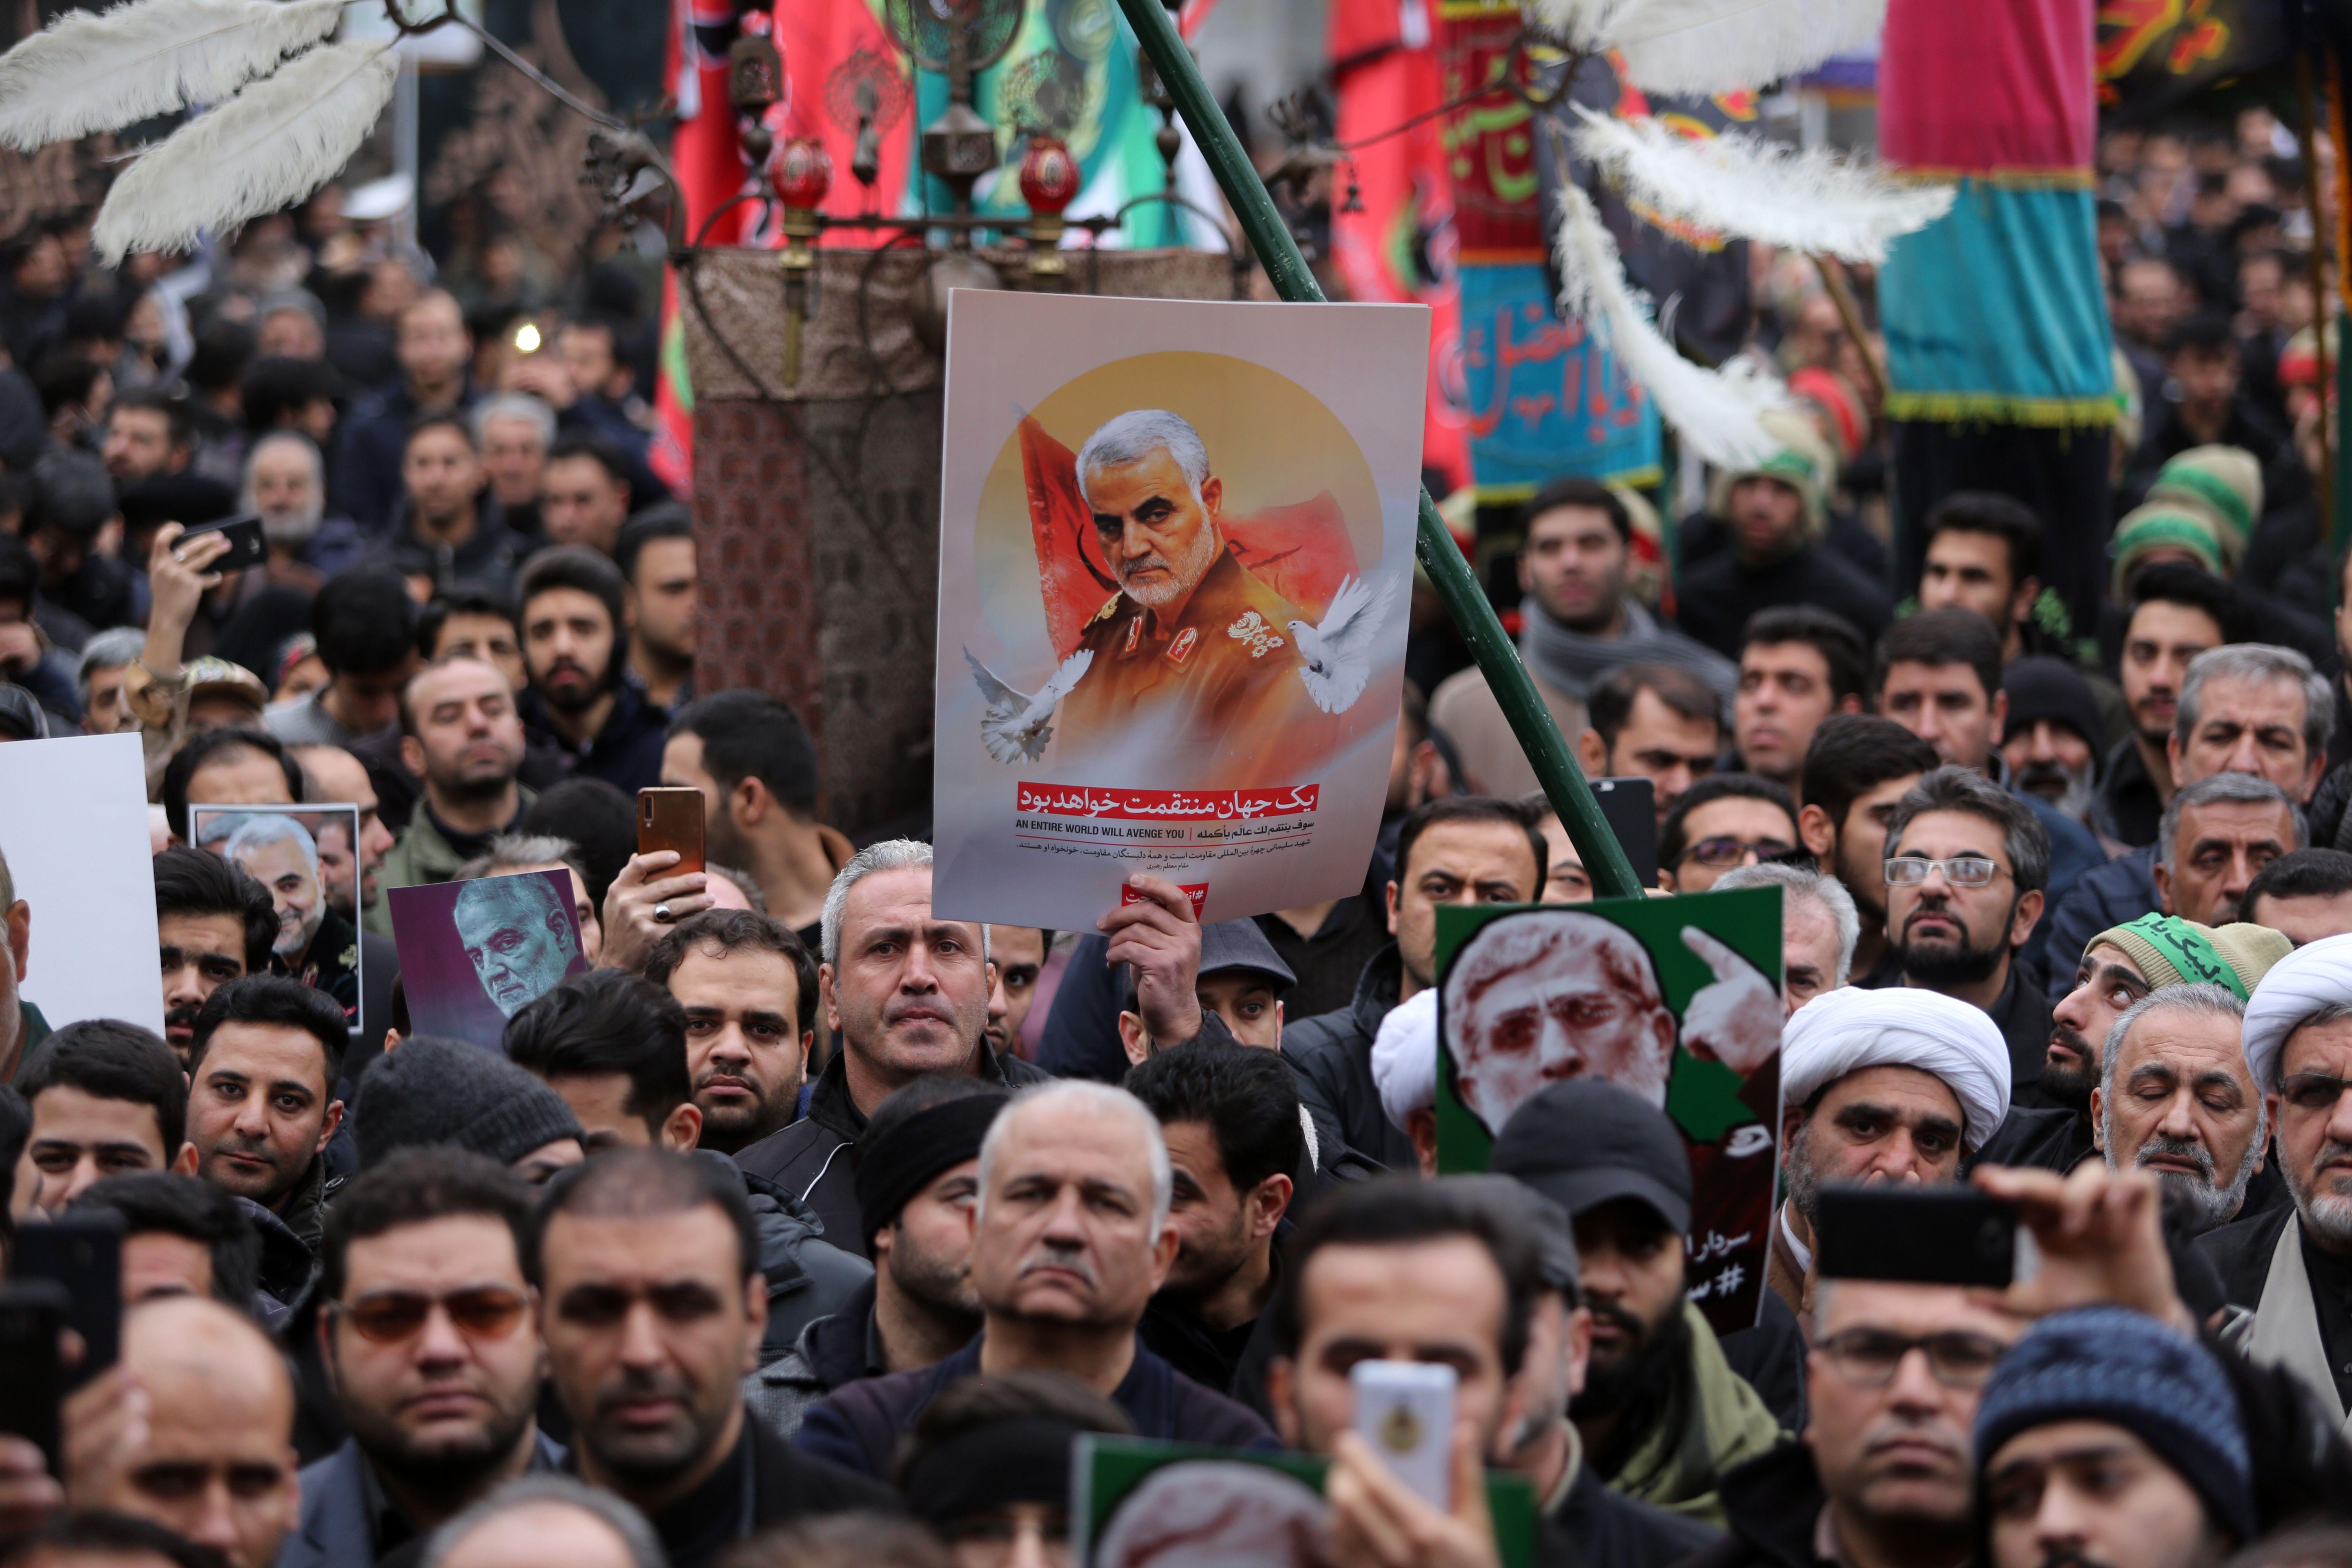 A large crowd of Iranian demonstrators. One holds up a poster of Soleimani.